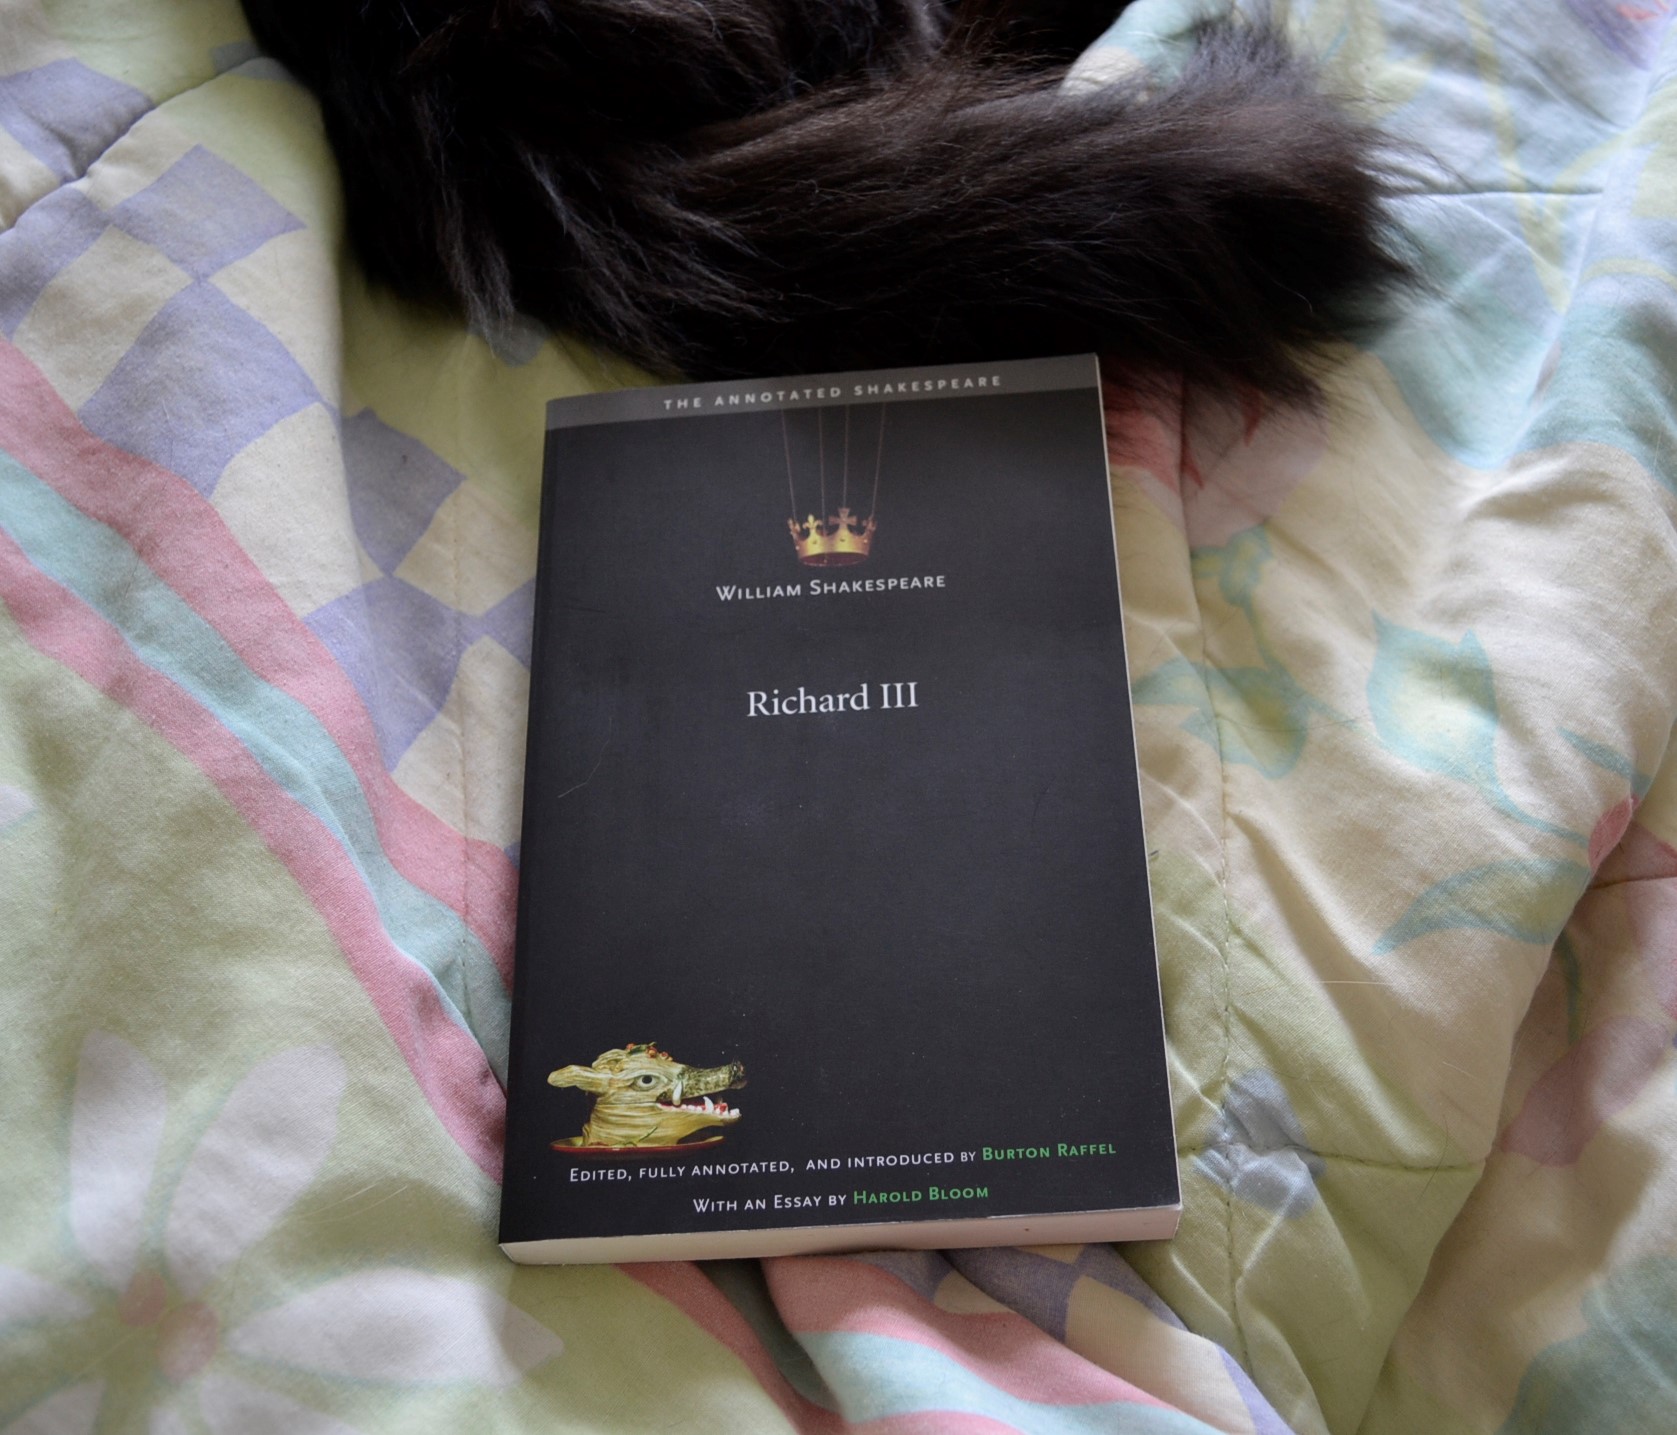 A black fluffy tail curls over the top of Richard III like a furry crown.